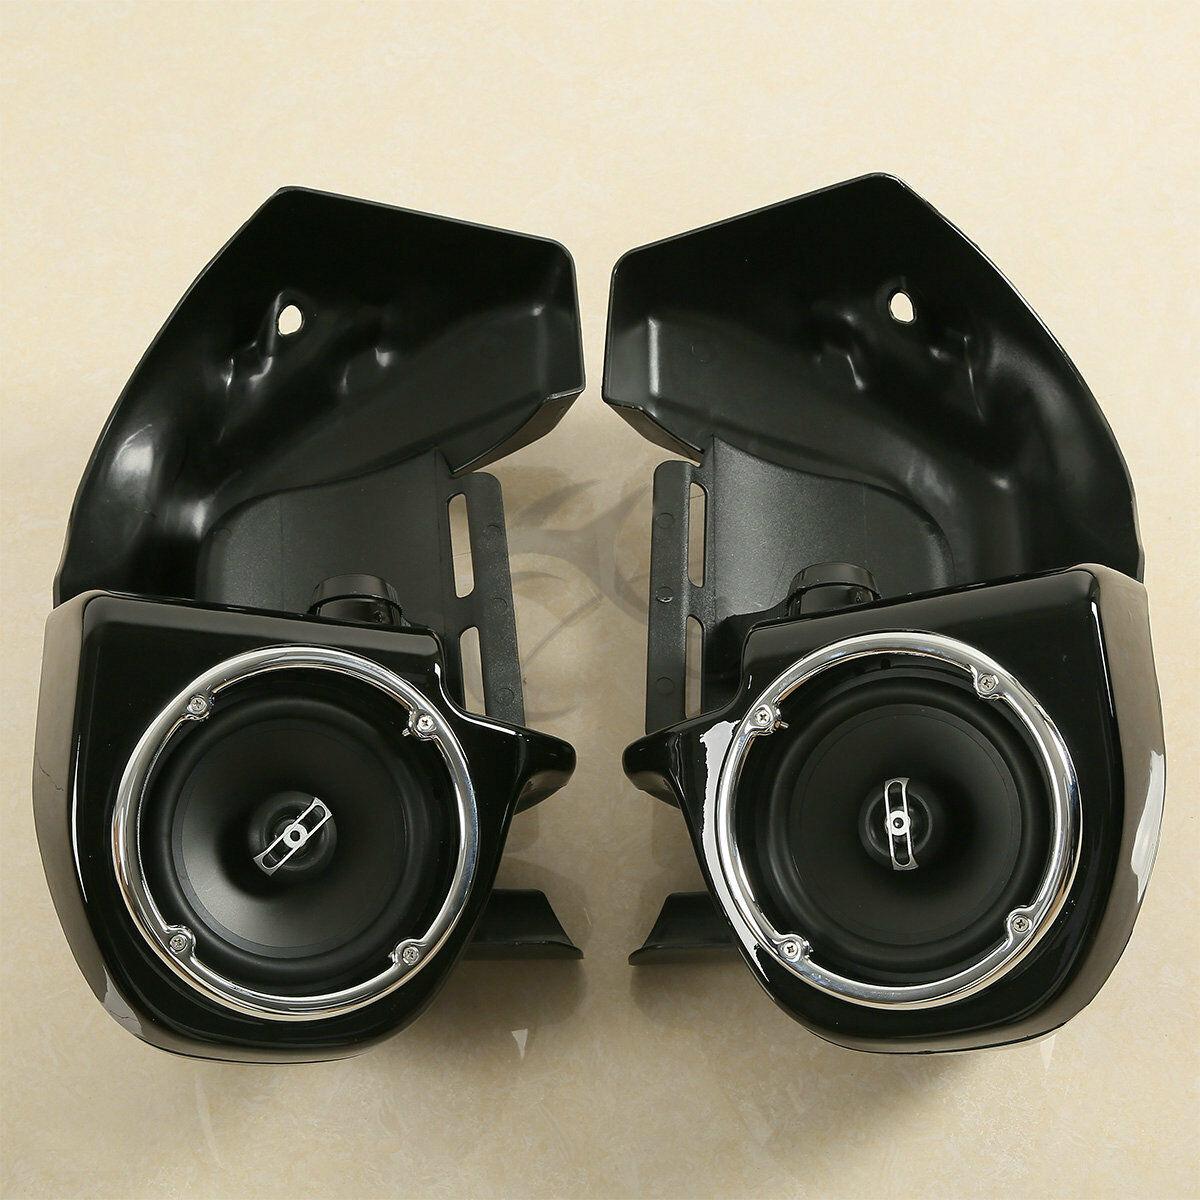 Lower Vented Fairings w/ 6.5" Speaker For Harley Touring Road Street Glide 83-13 - Moto Life Products